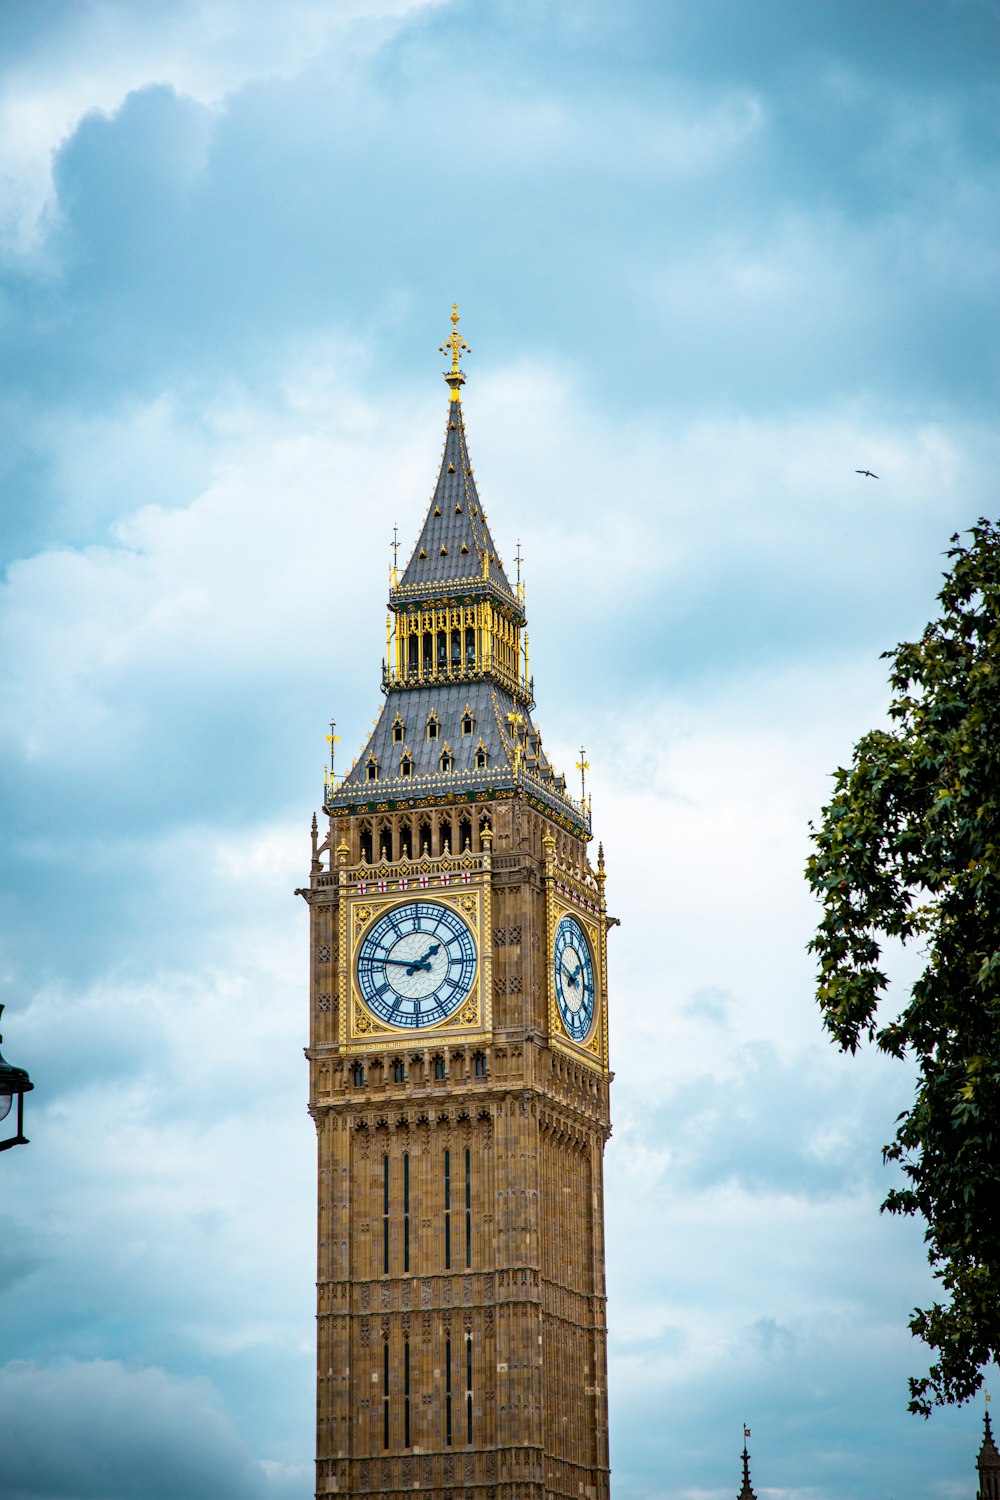 a clock tower with a weather vane with Big Ben in the background